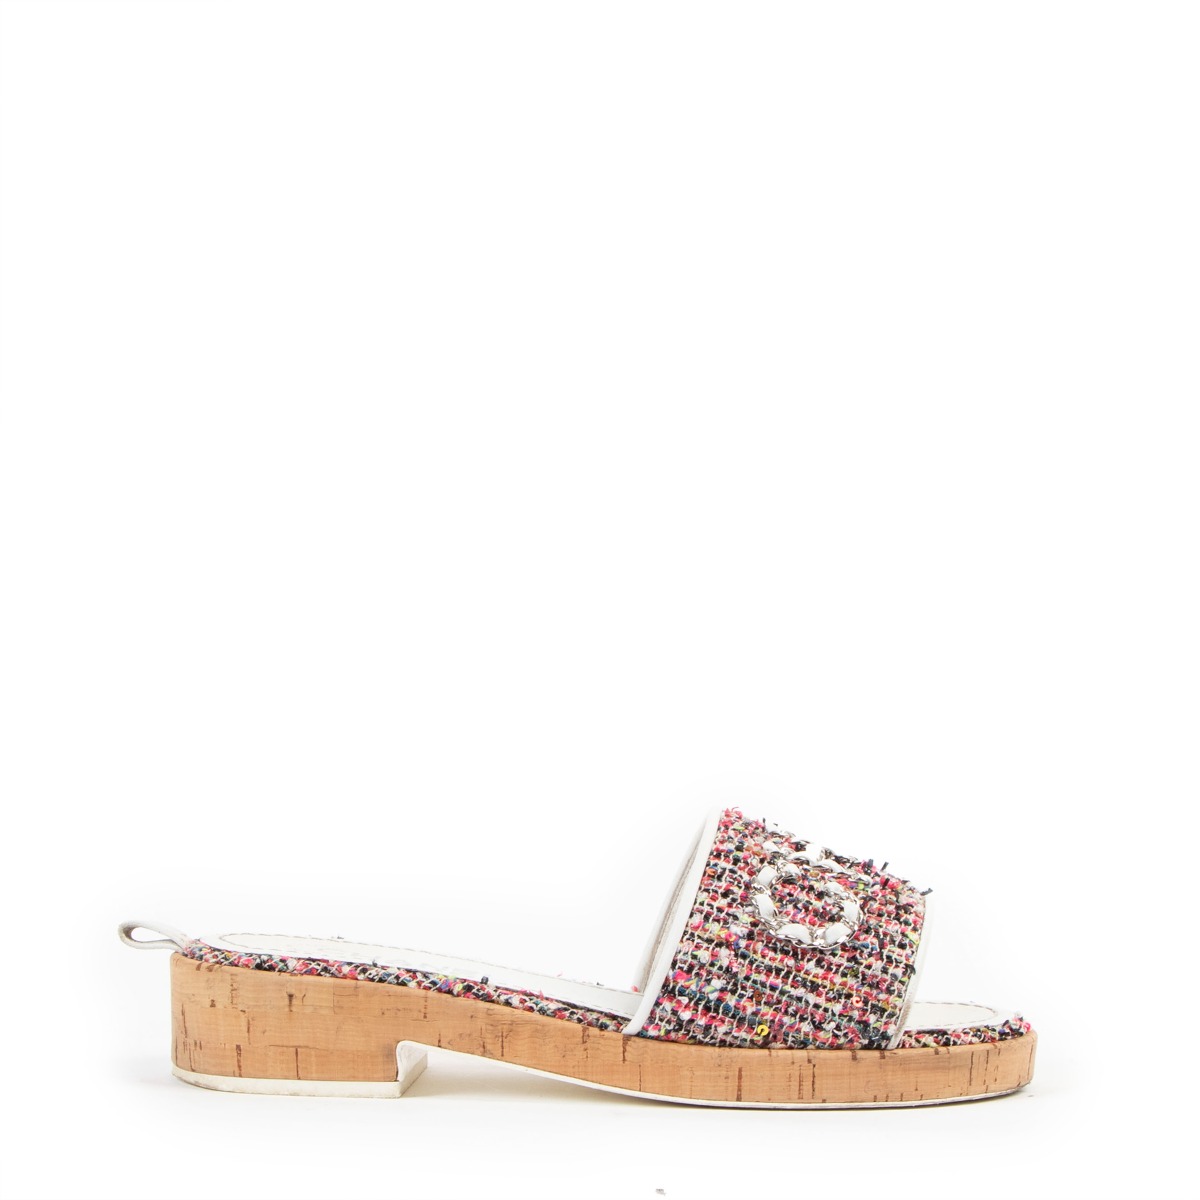 Chanel Women's Chain CHA-NEL Mule Sandals Tweed and Cork Multicolor 1827214